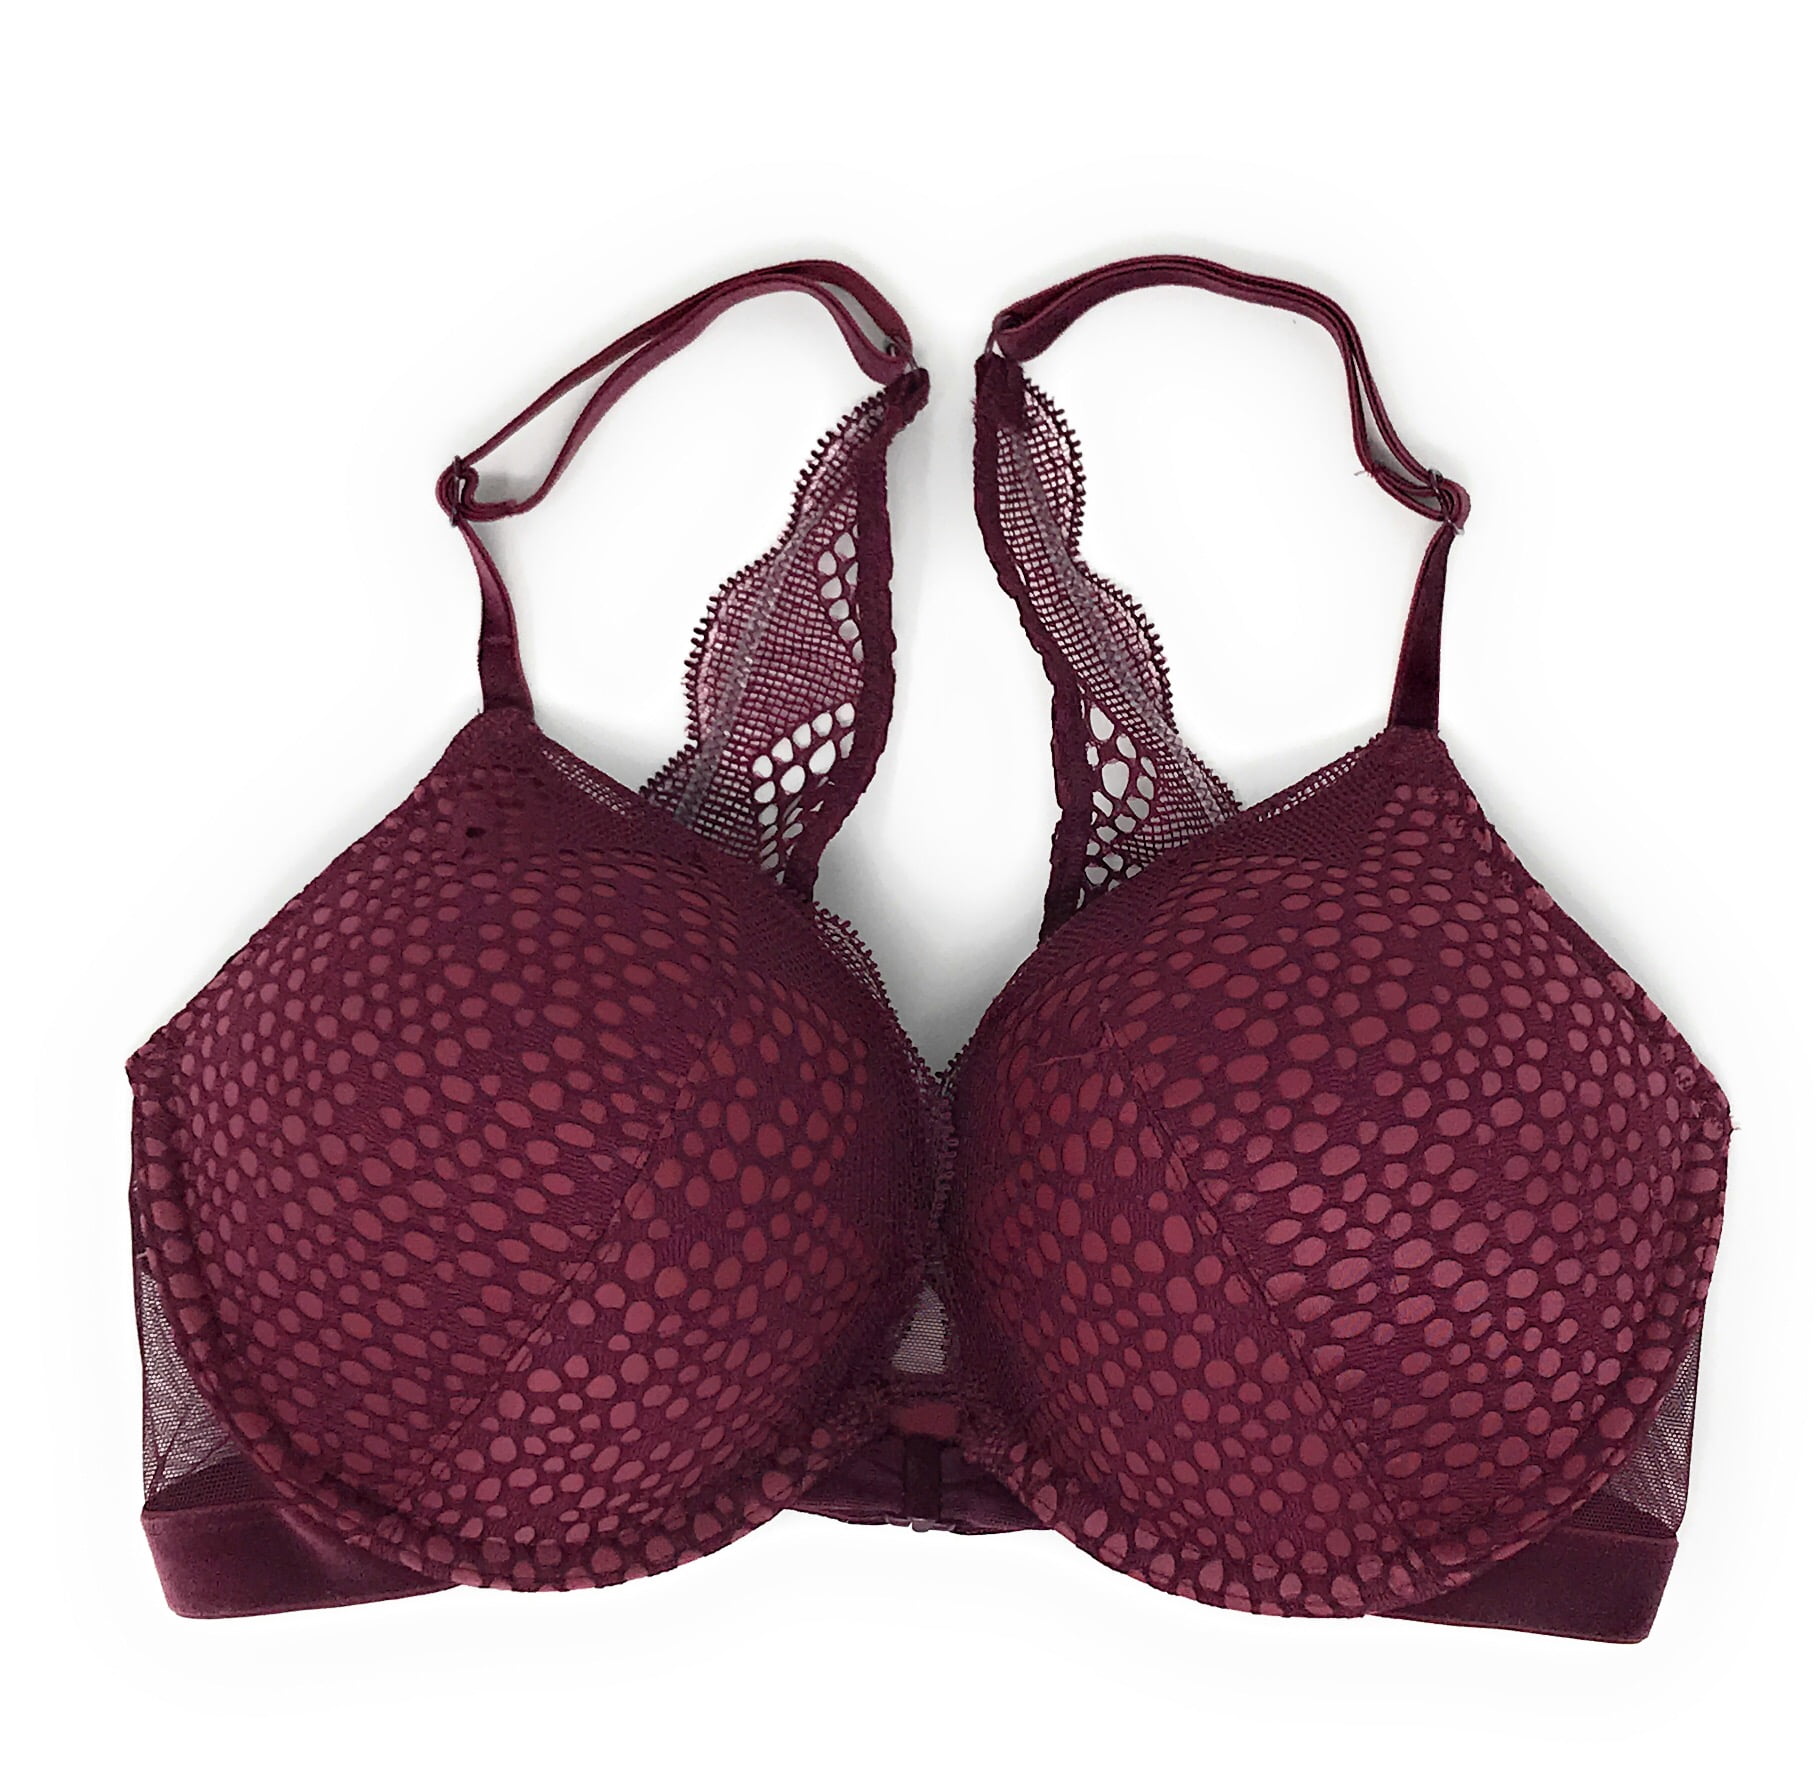 CurvyWordy - Oh how I wish this CityChic bra fitted me - it's absolutely  gorgeous! This is a 38G and the cups are much too small and the band is too  big (